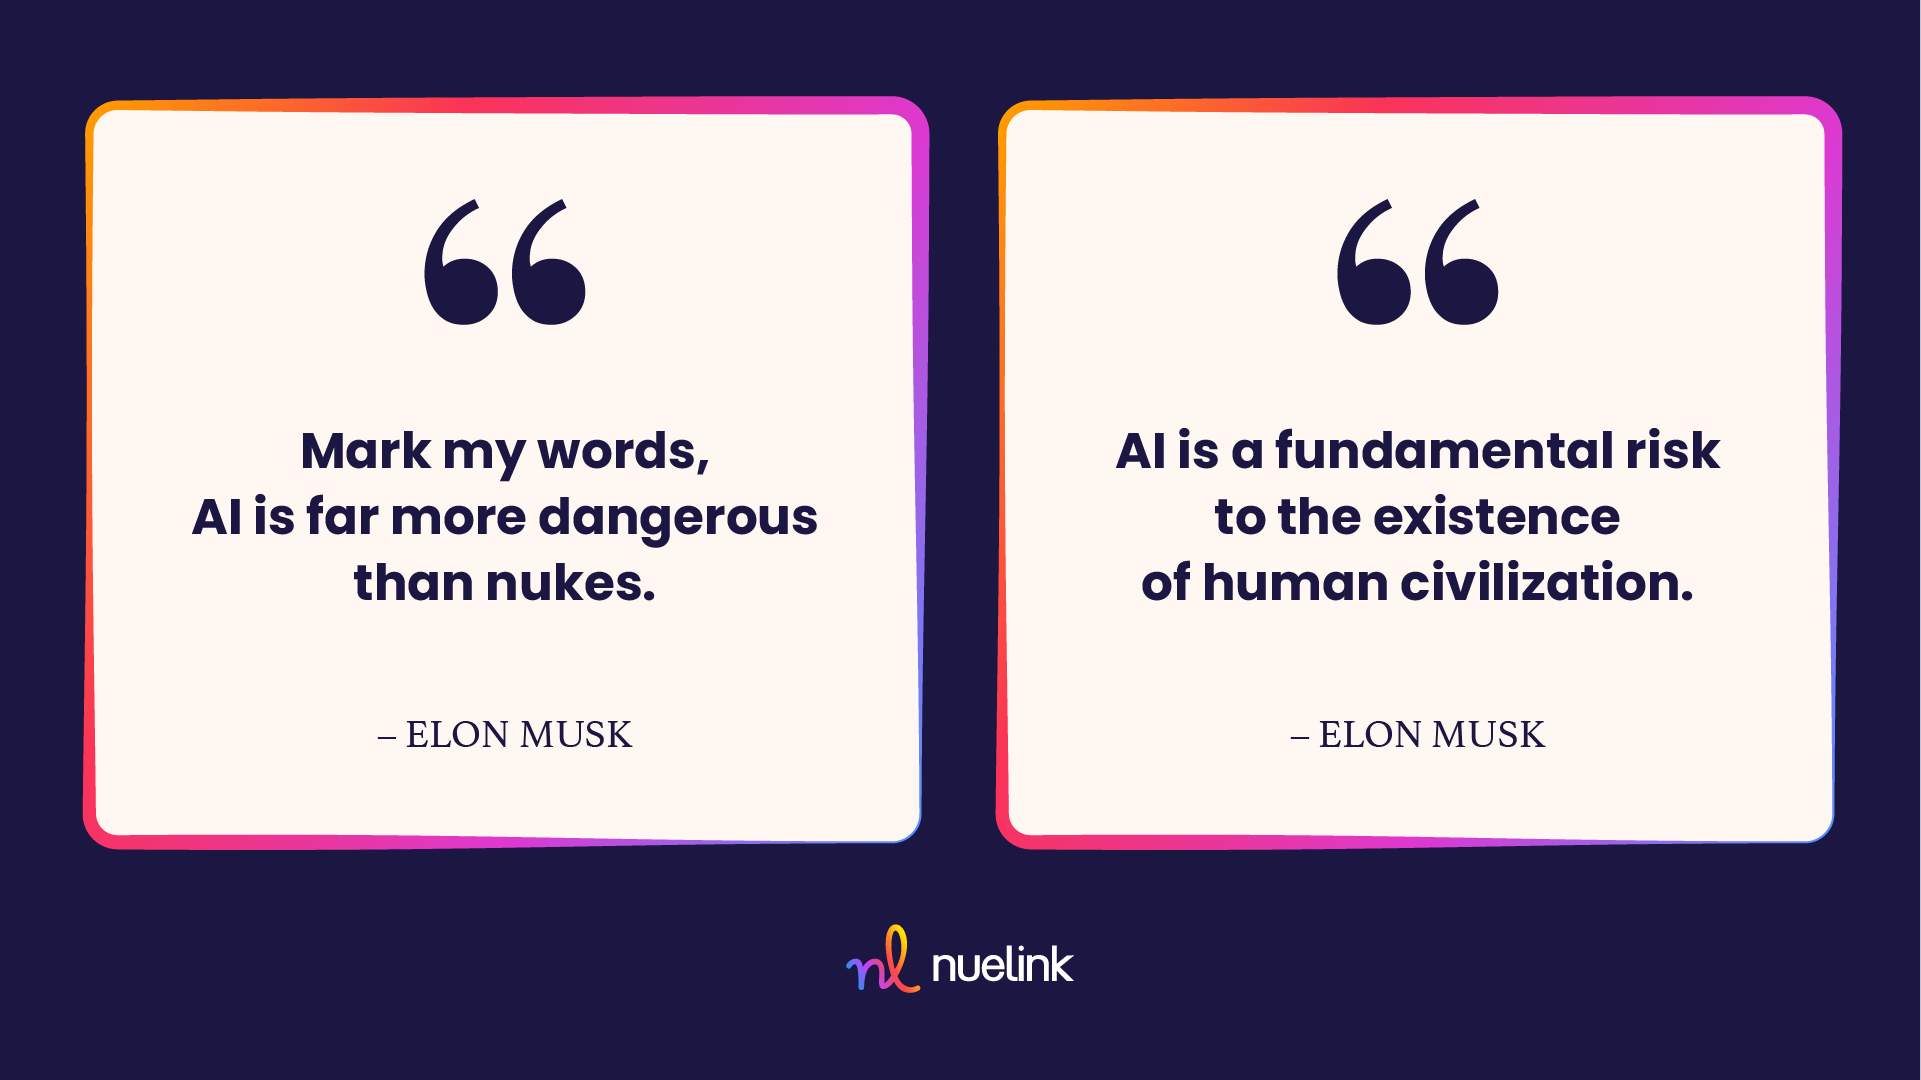 ELON MUSK QUOTES ABOUT AI